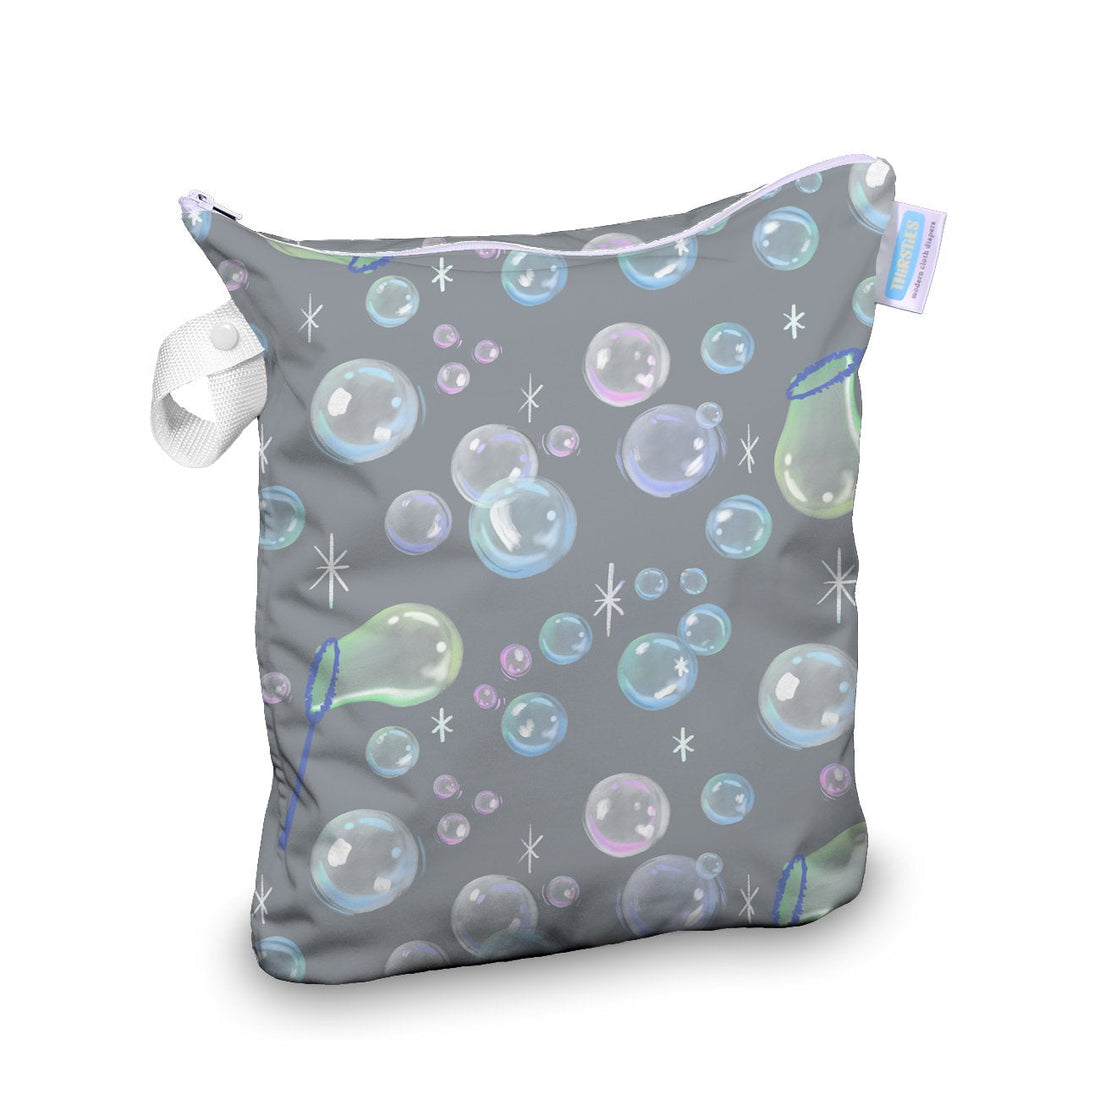 Thirsties Deluxe Wet Bag - Bubbly